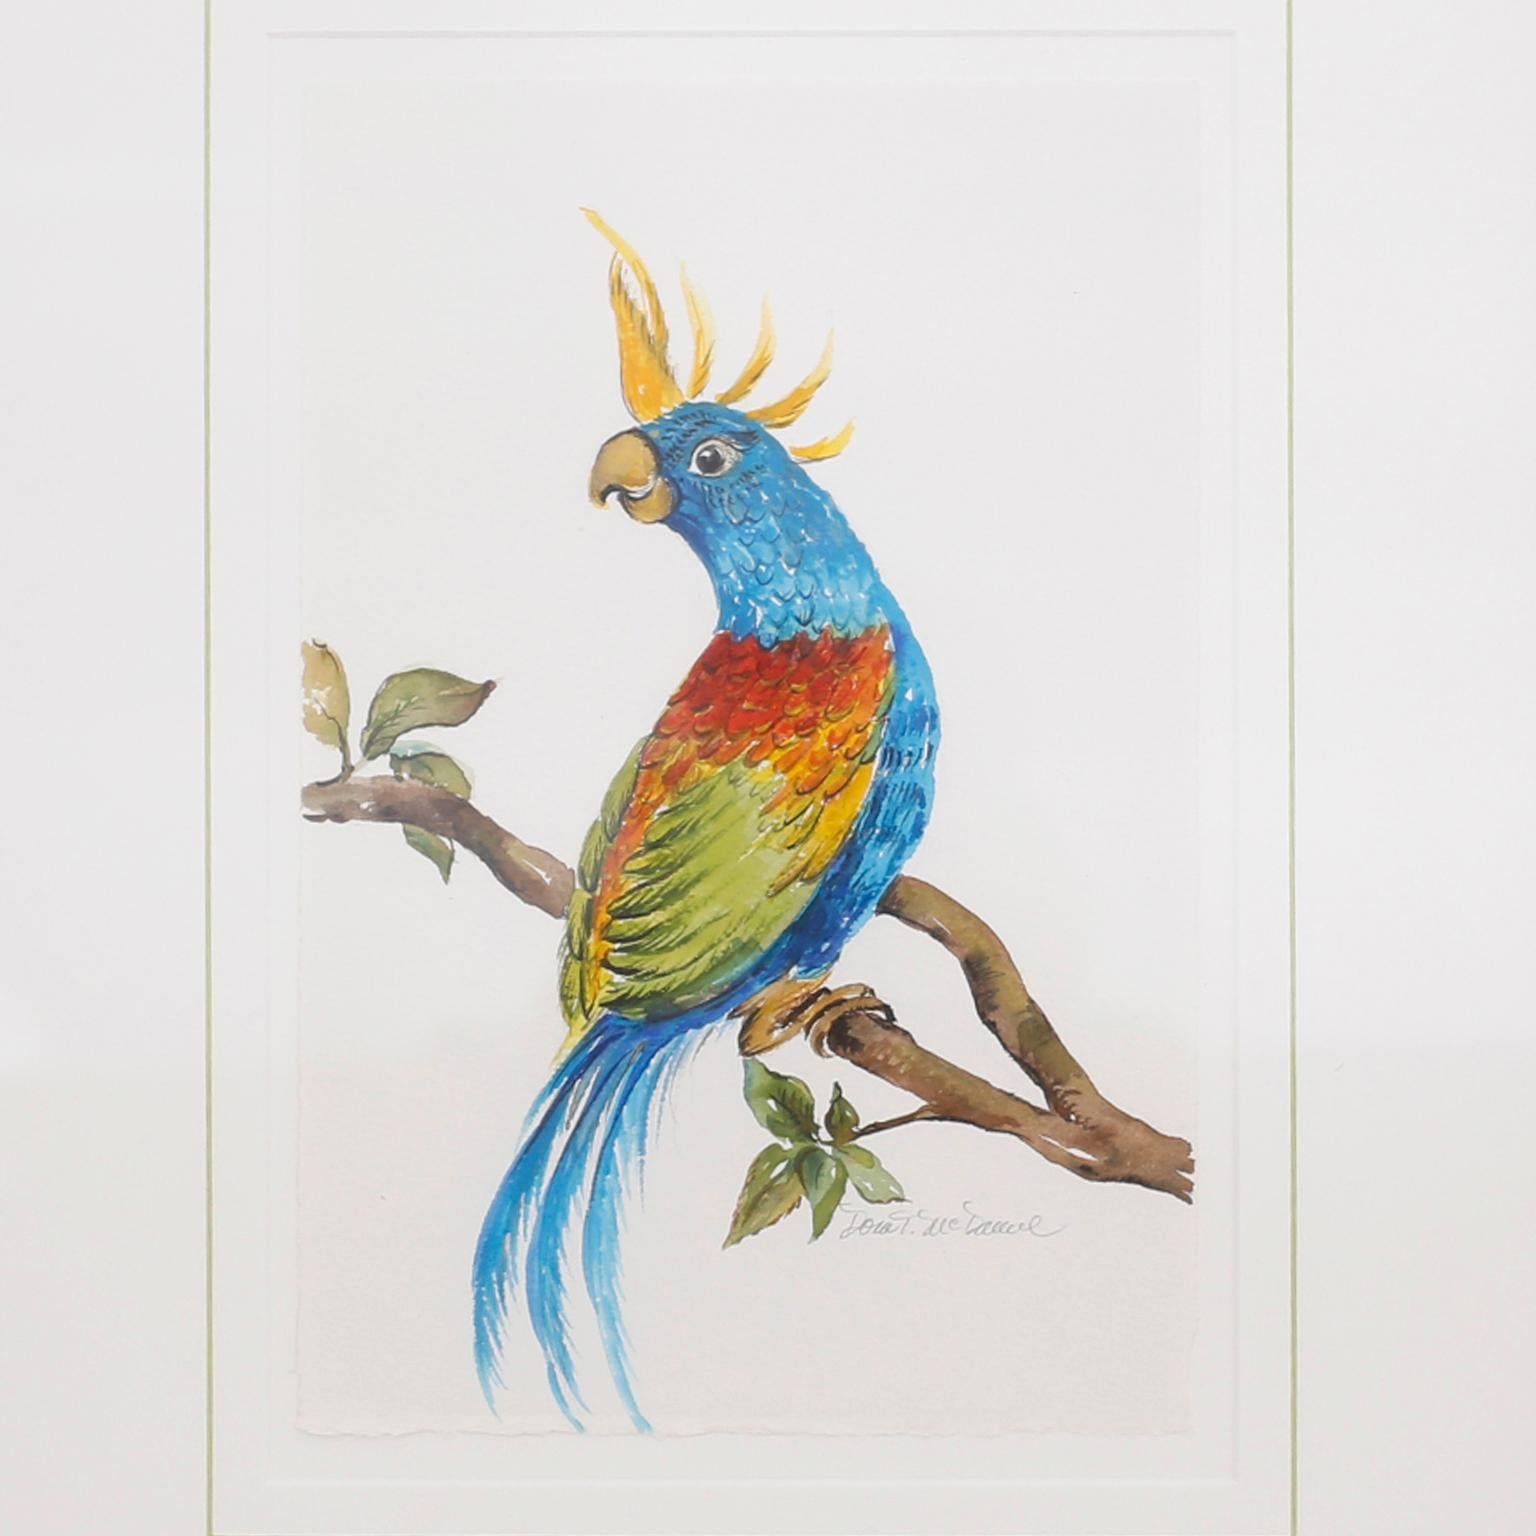 Delightful set of four watercolors of parrots executed with vivid tropical colors and artistic aplomb. Signed by the noted artist Dora McDanial behind glass and presented in carved wood painted frames.